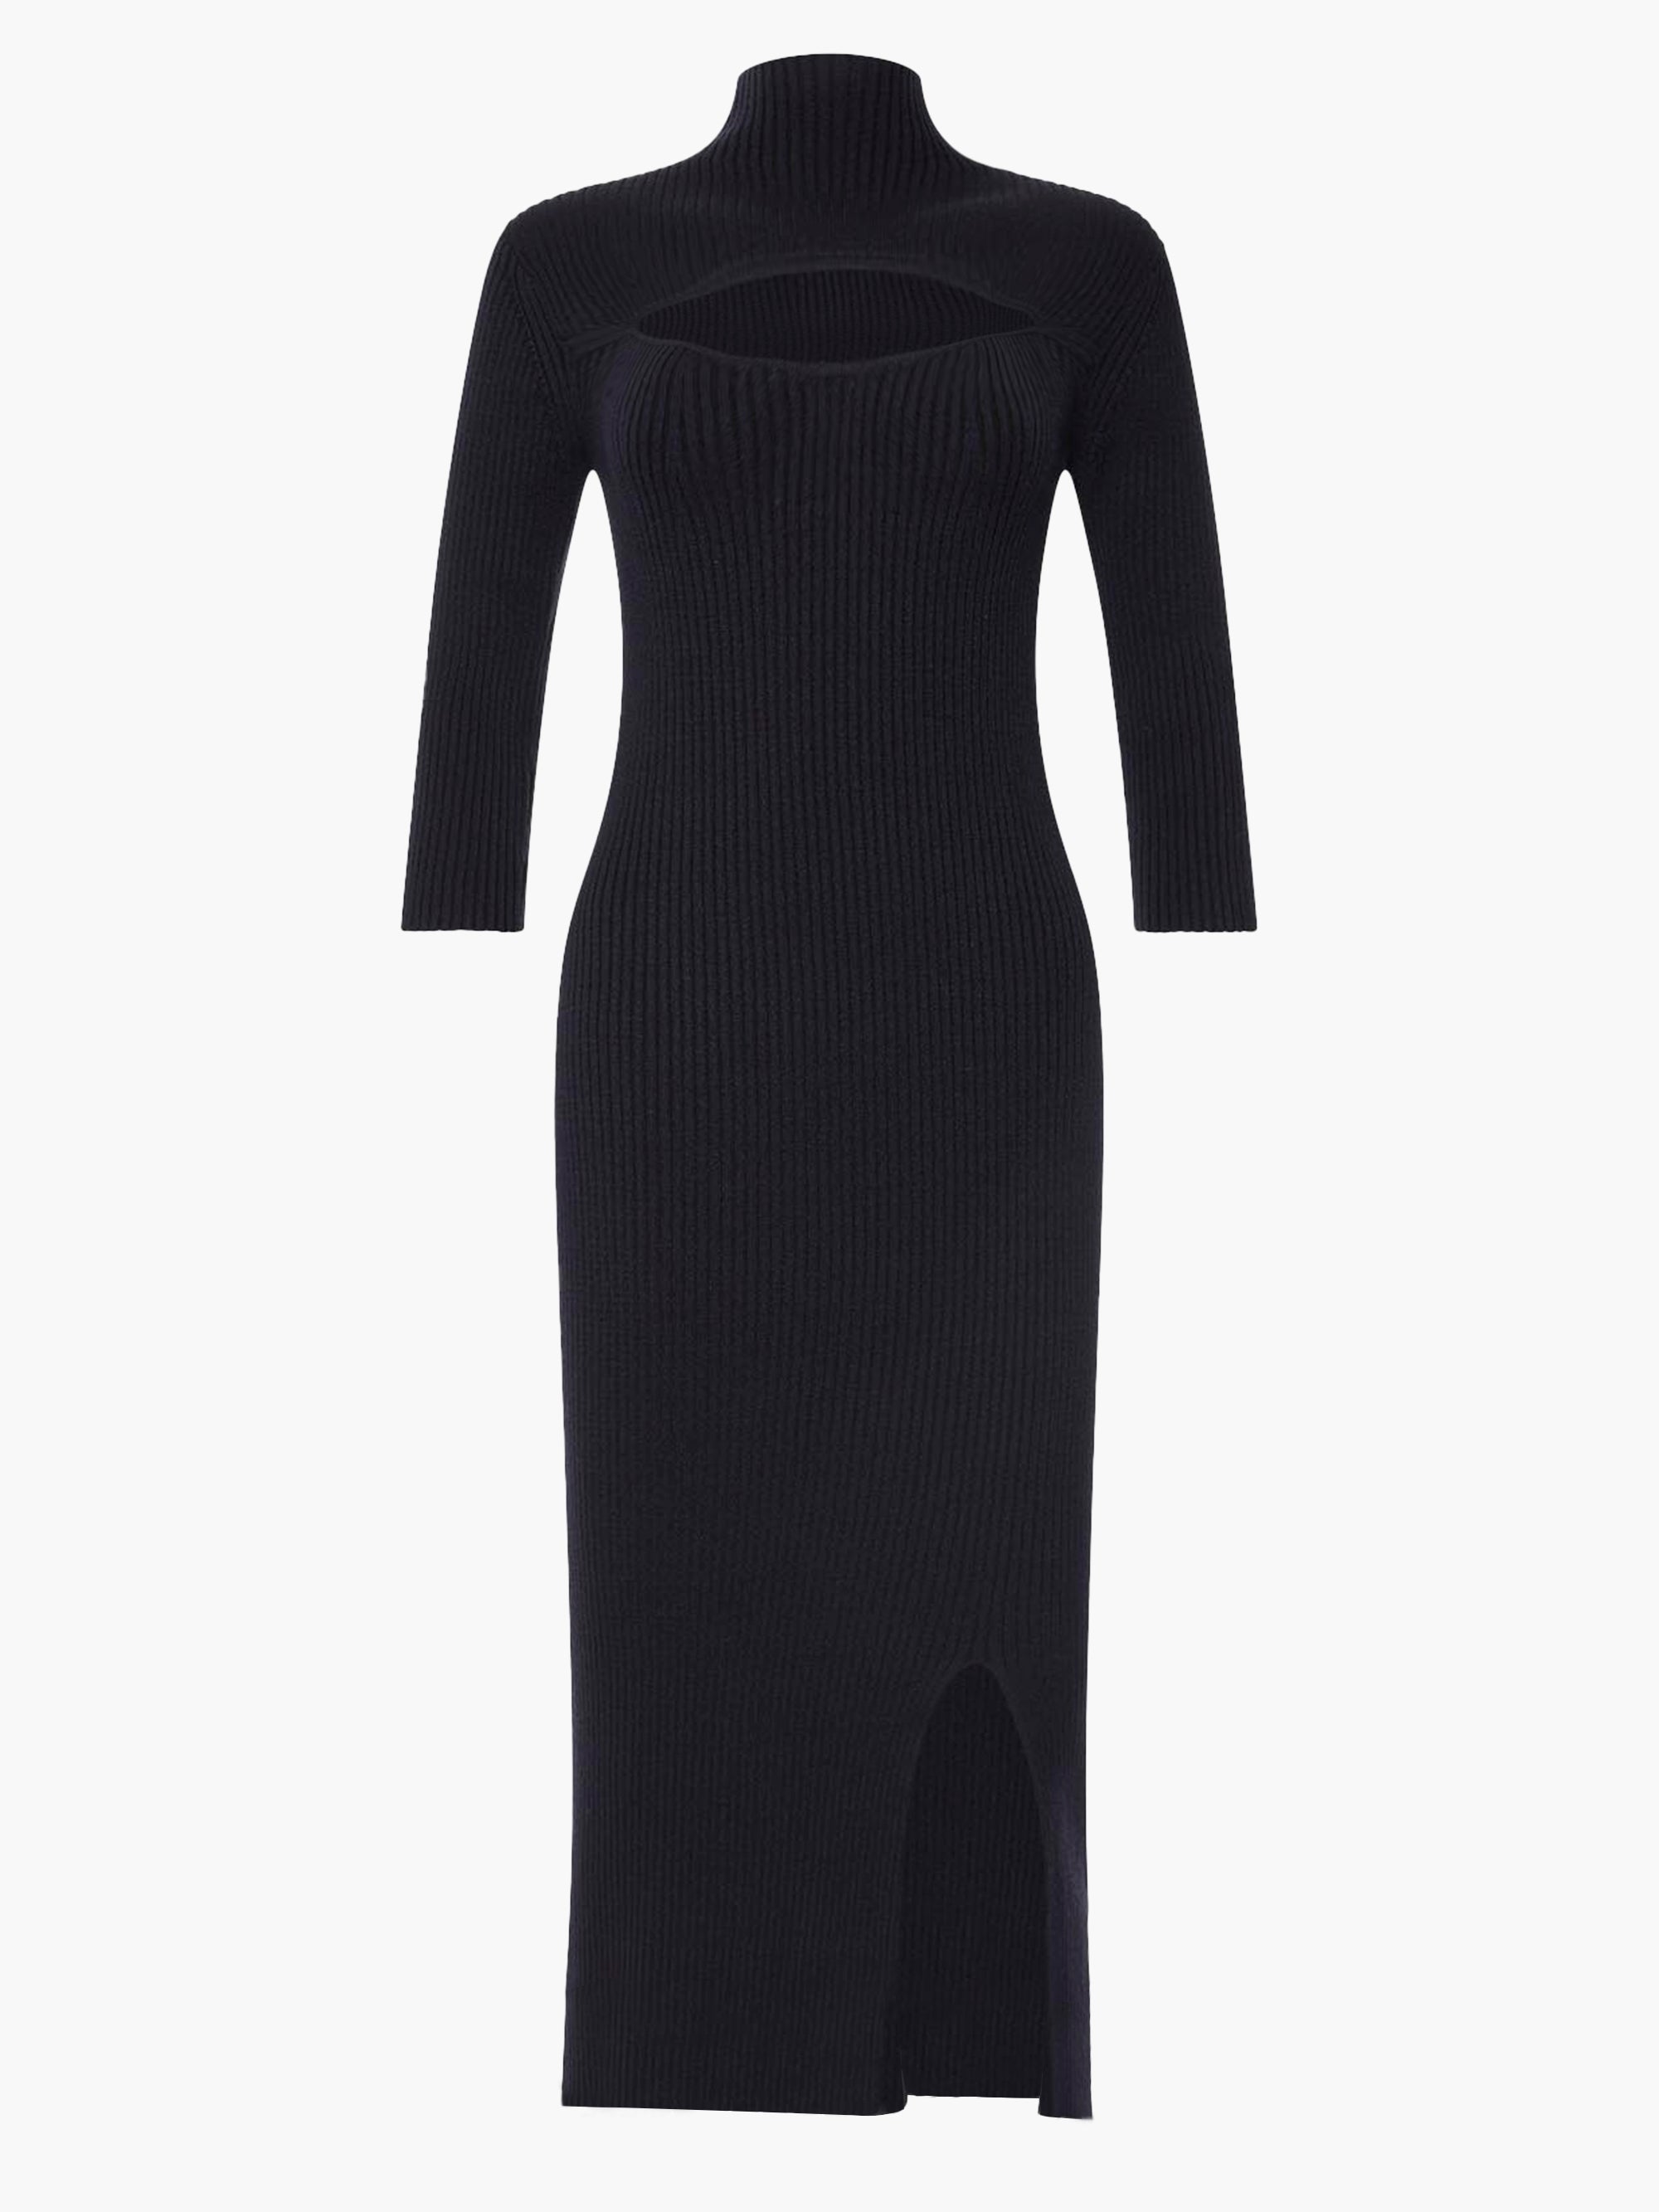 Mathilda Knit Cut Out Dress Black | French Connection US